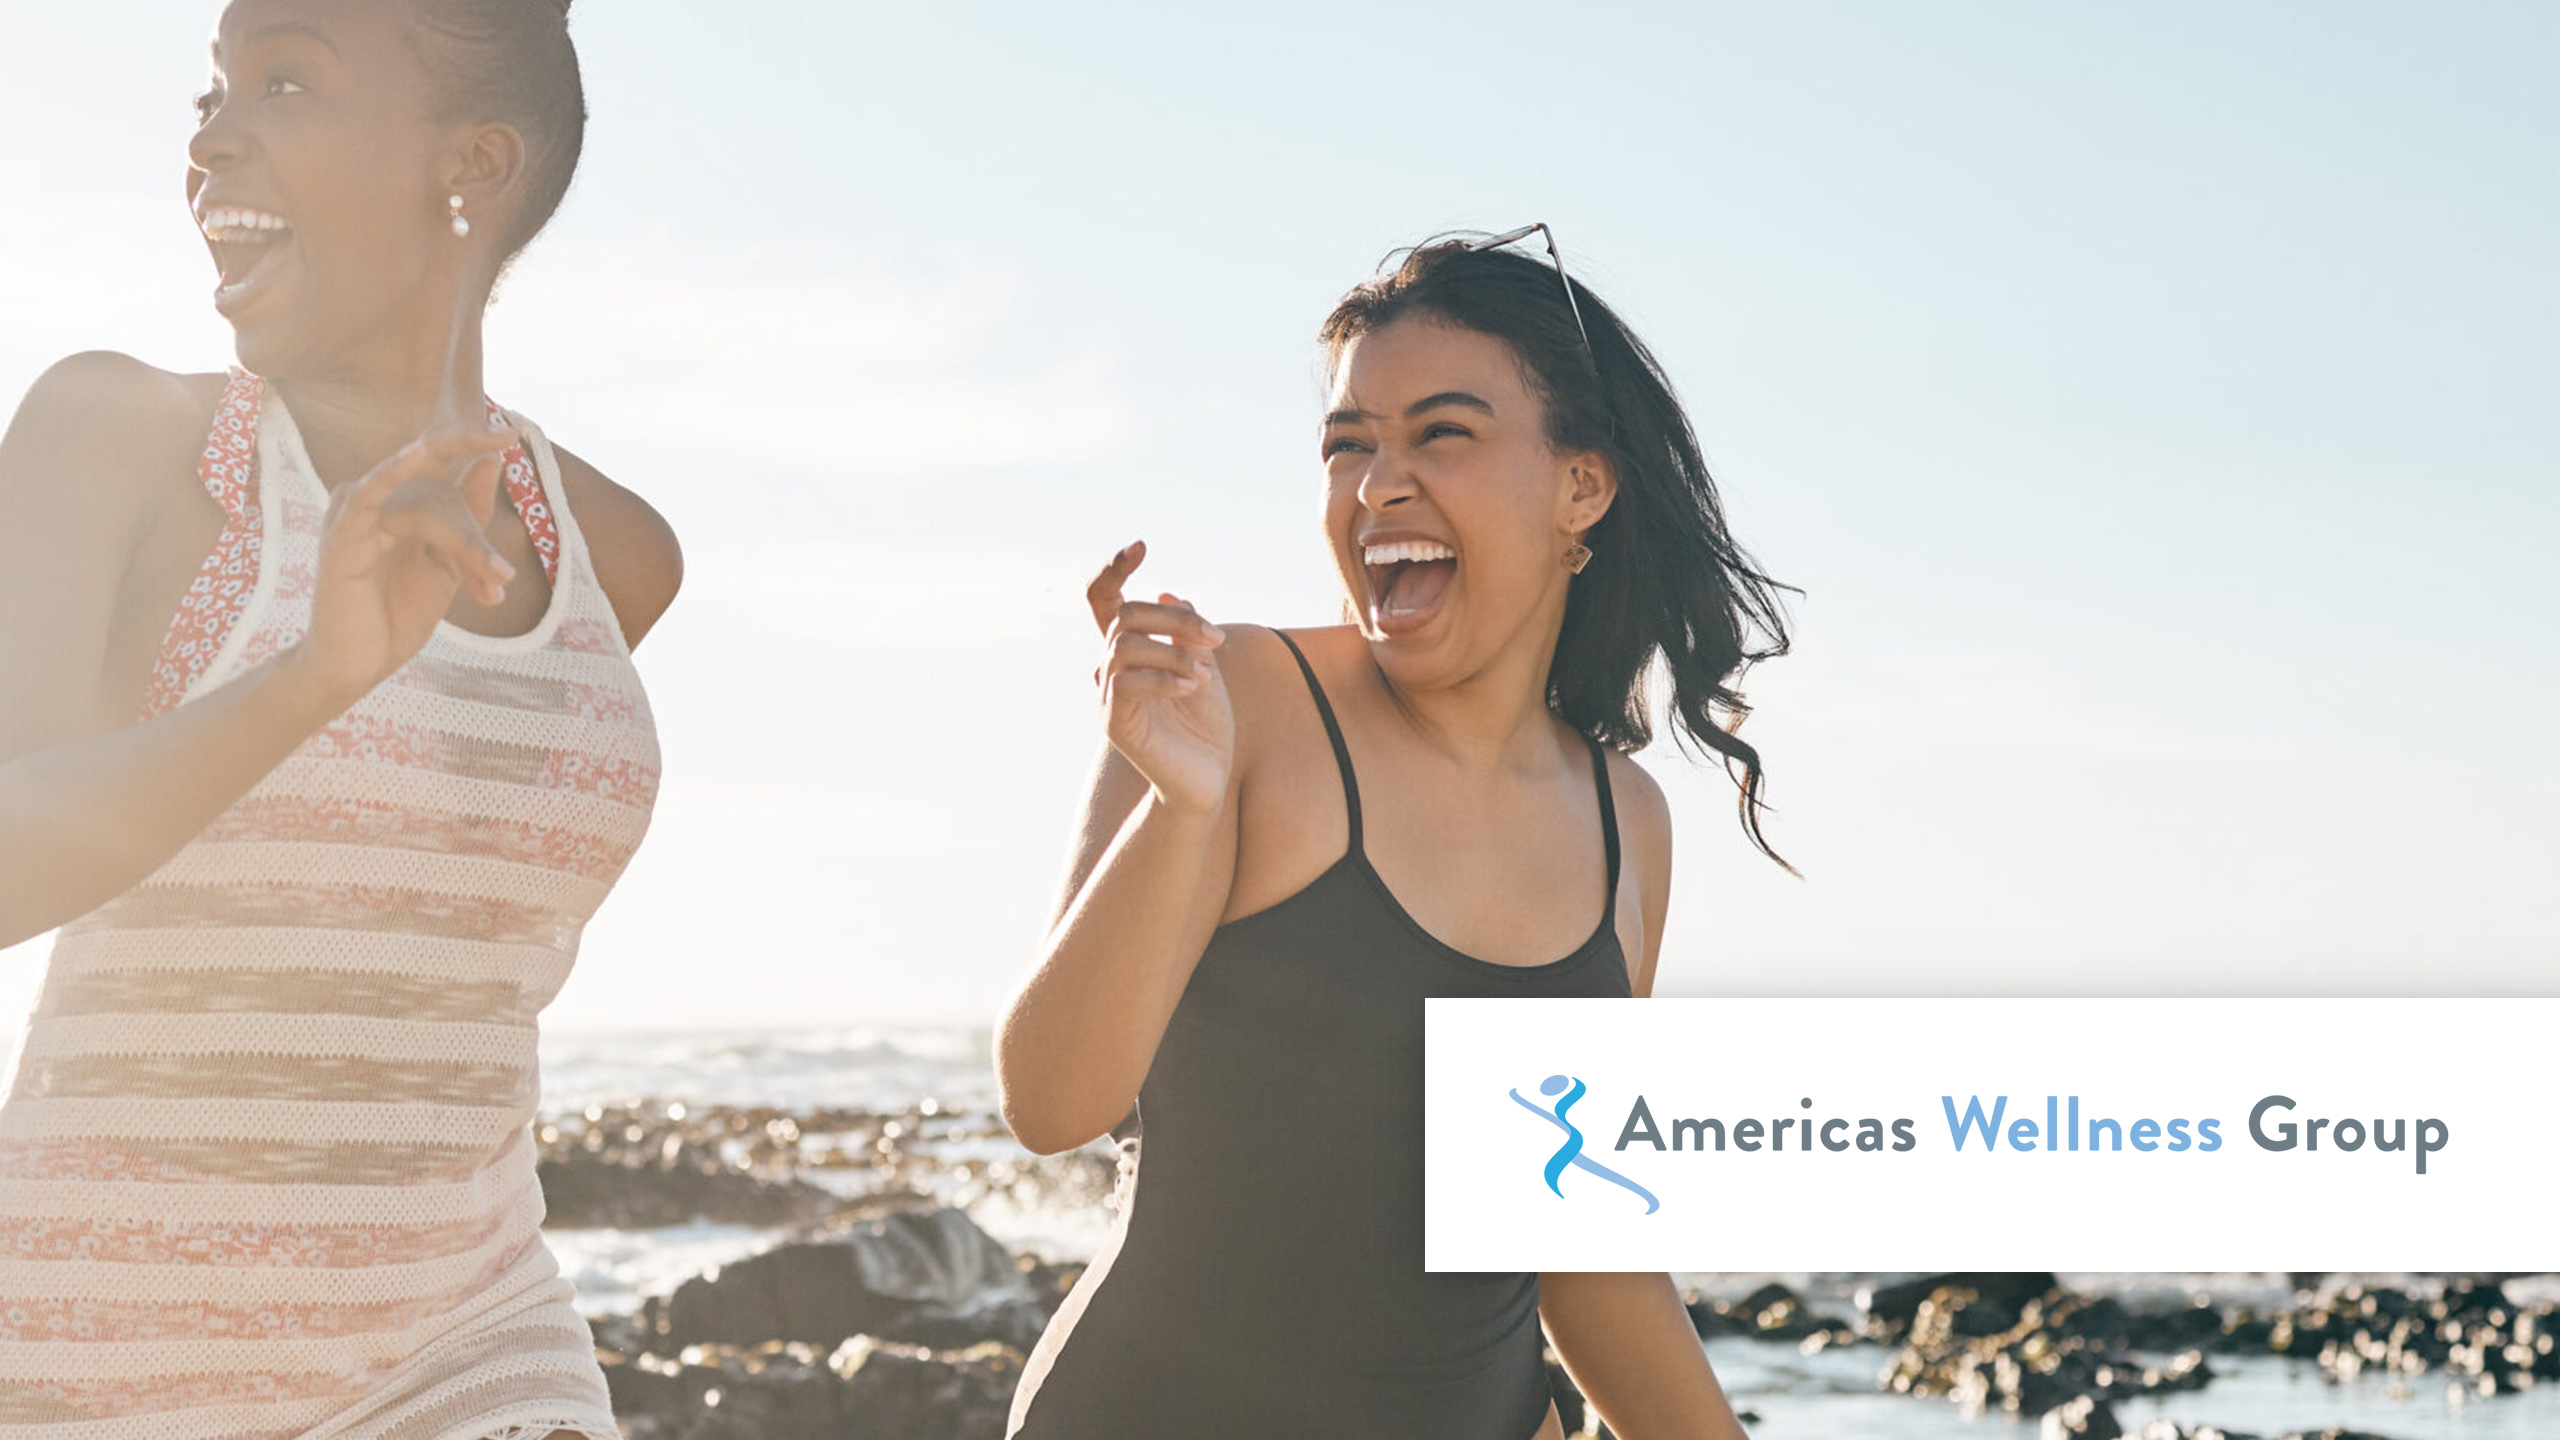 Weight loss program, national weight loss company, Ozempic, Americas Wellness Group, Americas Wellness, Semaglutide, Semaglutide Weight Loss Near Me, Semaglutide Clinic, Ozempic for Weight Loss, Ozempic Semaglutide